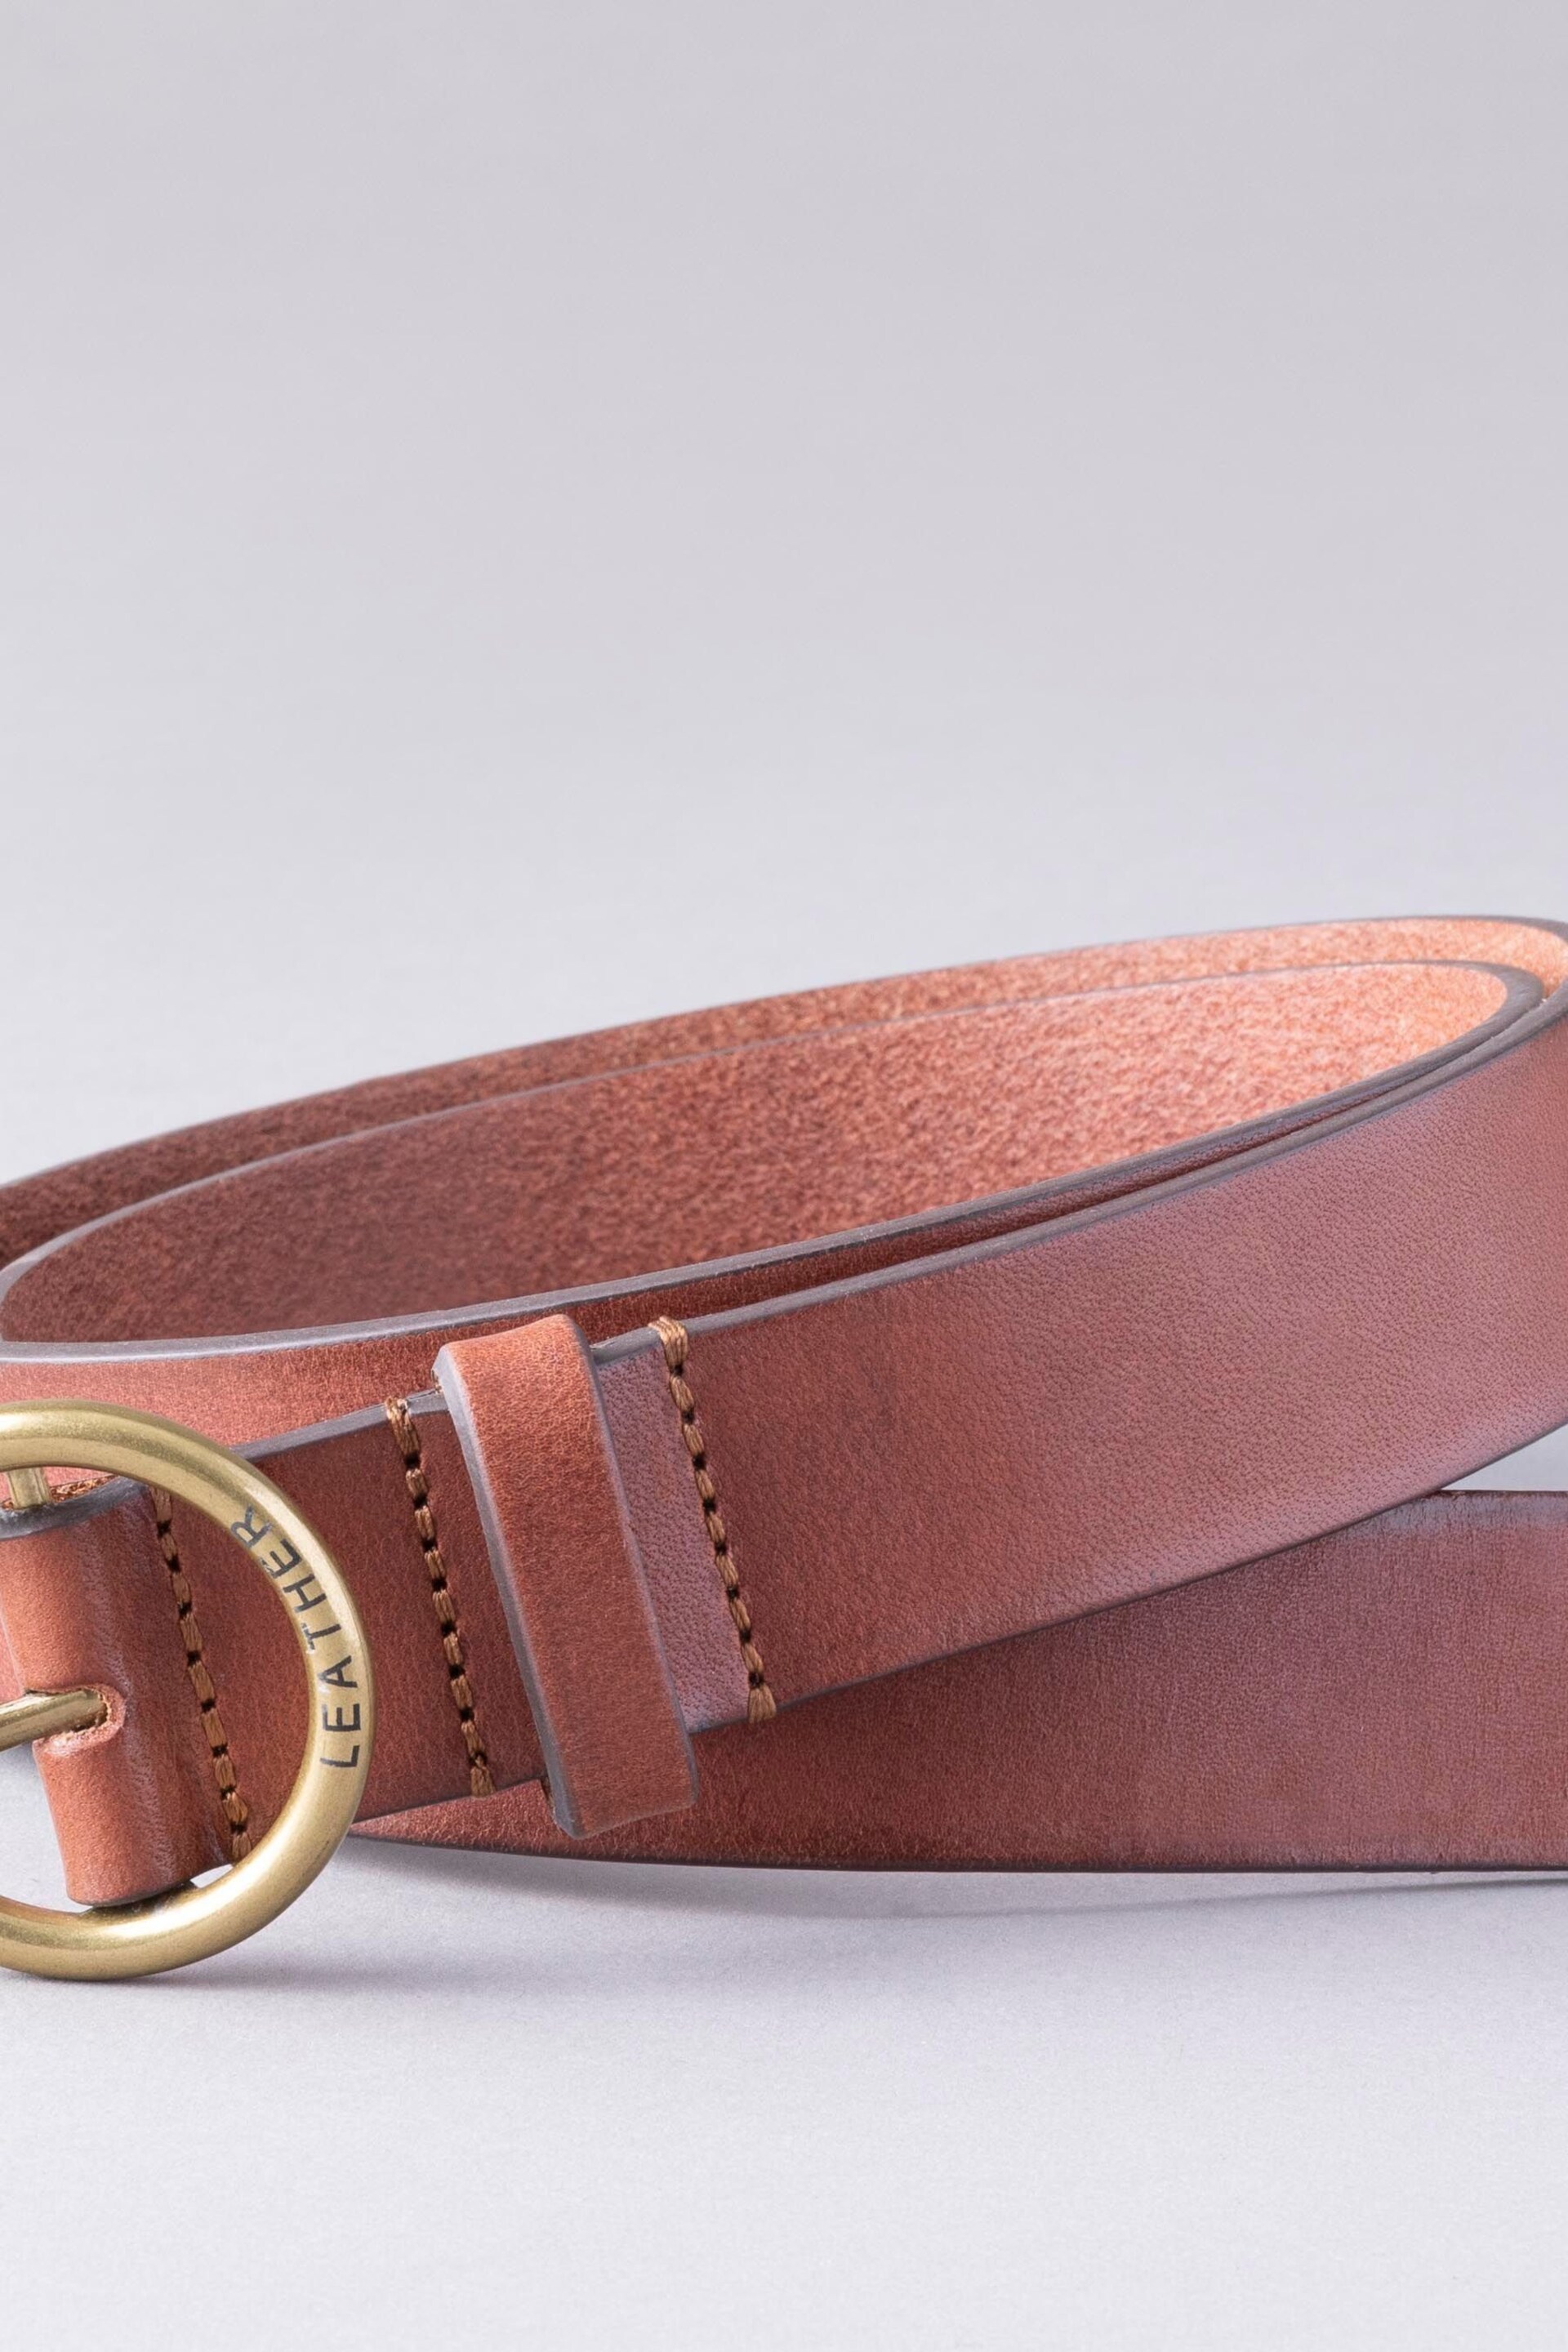 Lakeland Leather Tan Brown Buckle Leather Belt - Image 2 of 3